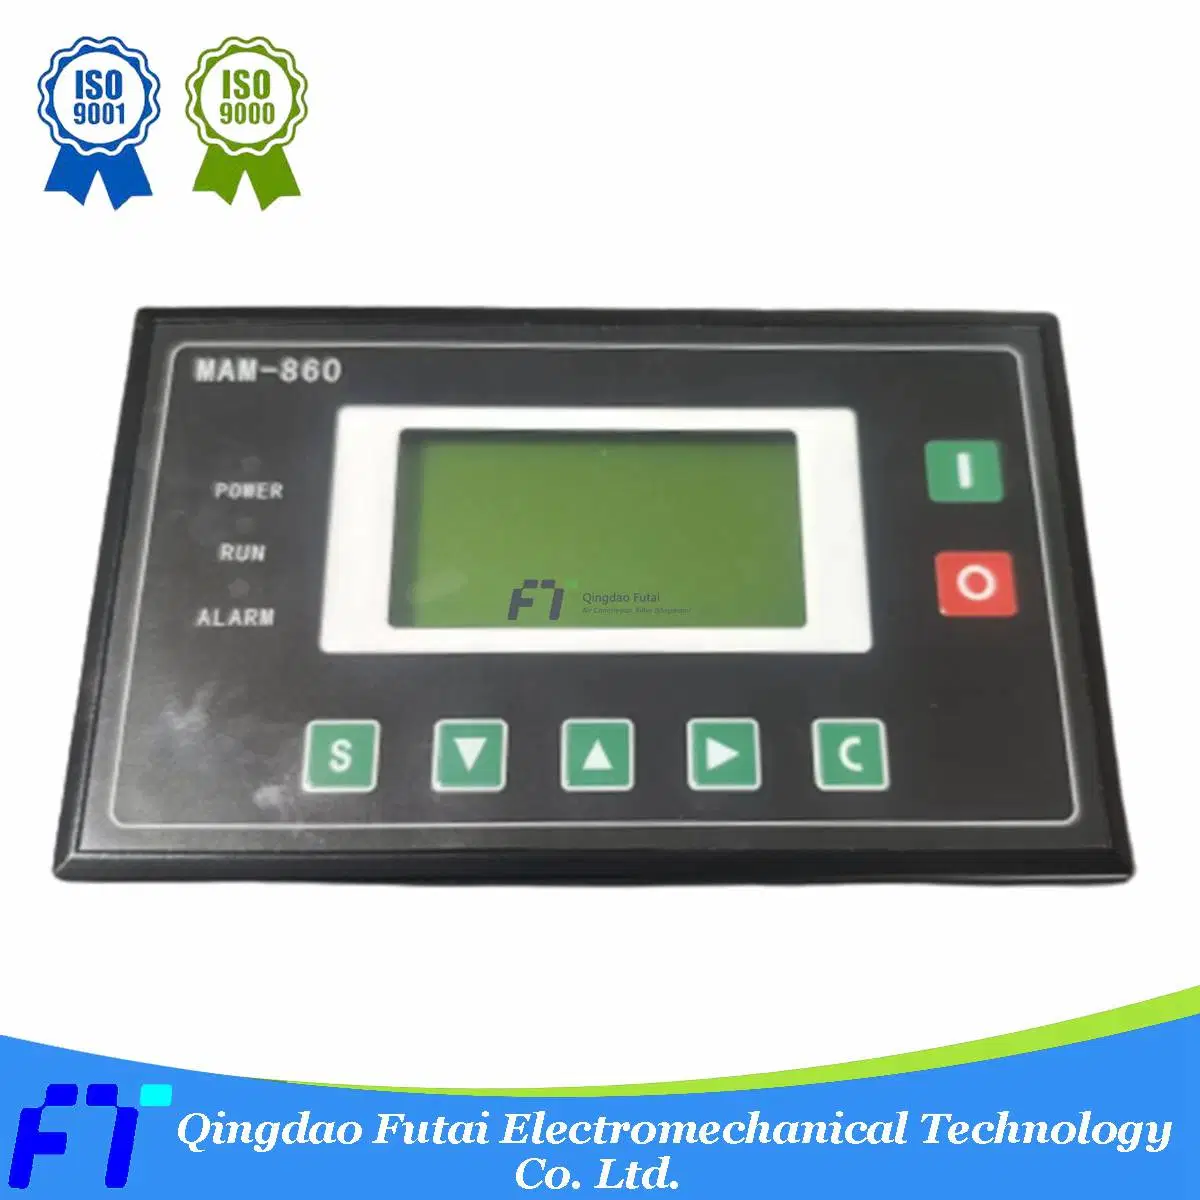 Electric Board Controller for Screw Air Compressor Mam-860 Mam860 Mam-870 Mam-680 Mam-890 Mam-880 Controller Mam-6080